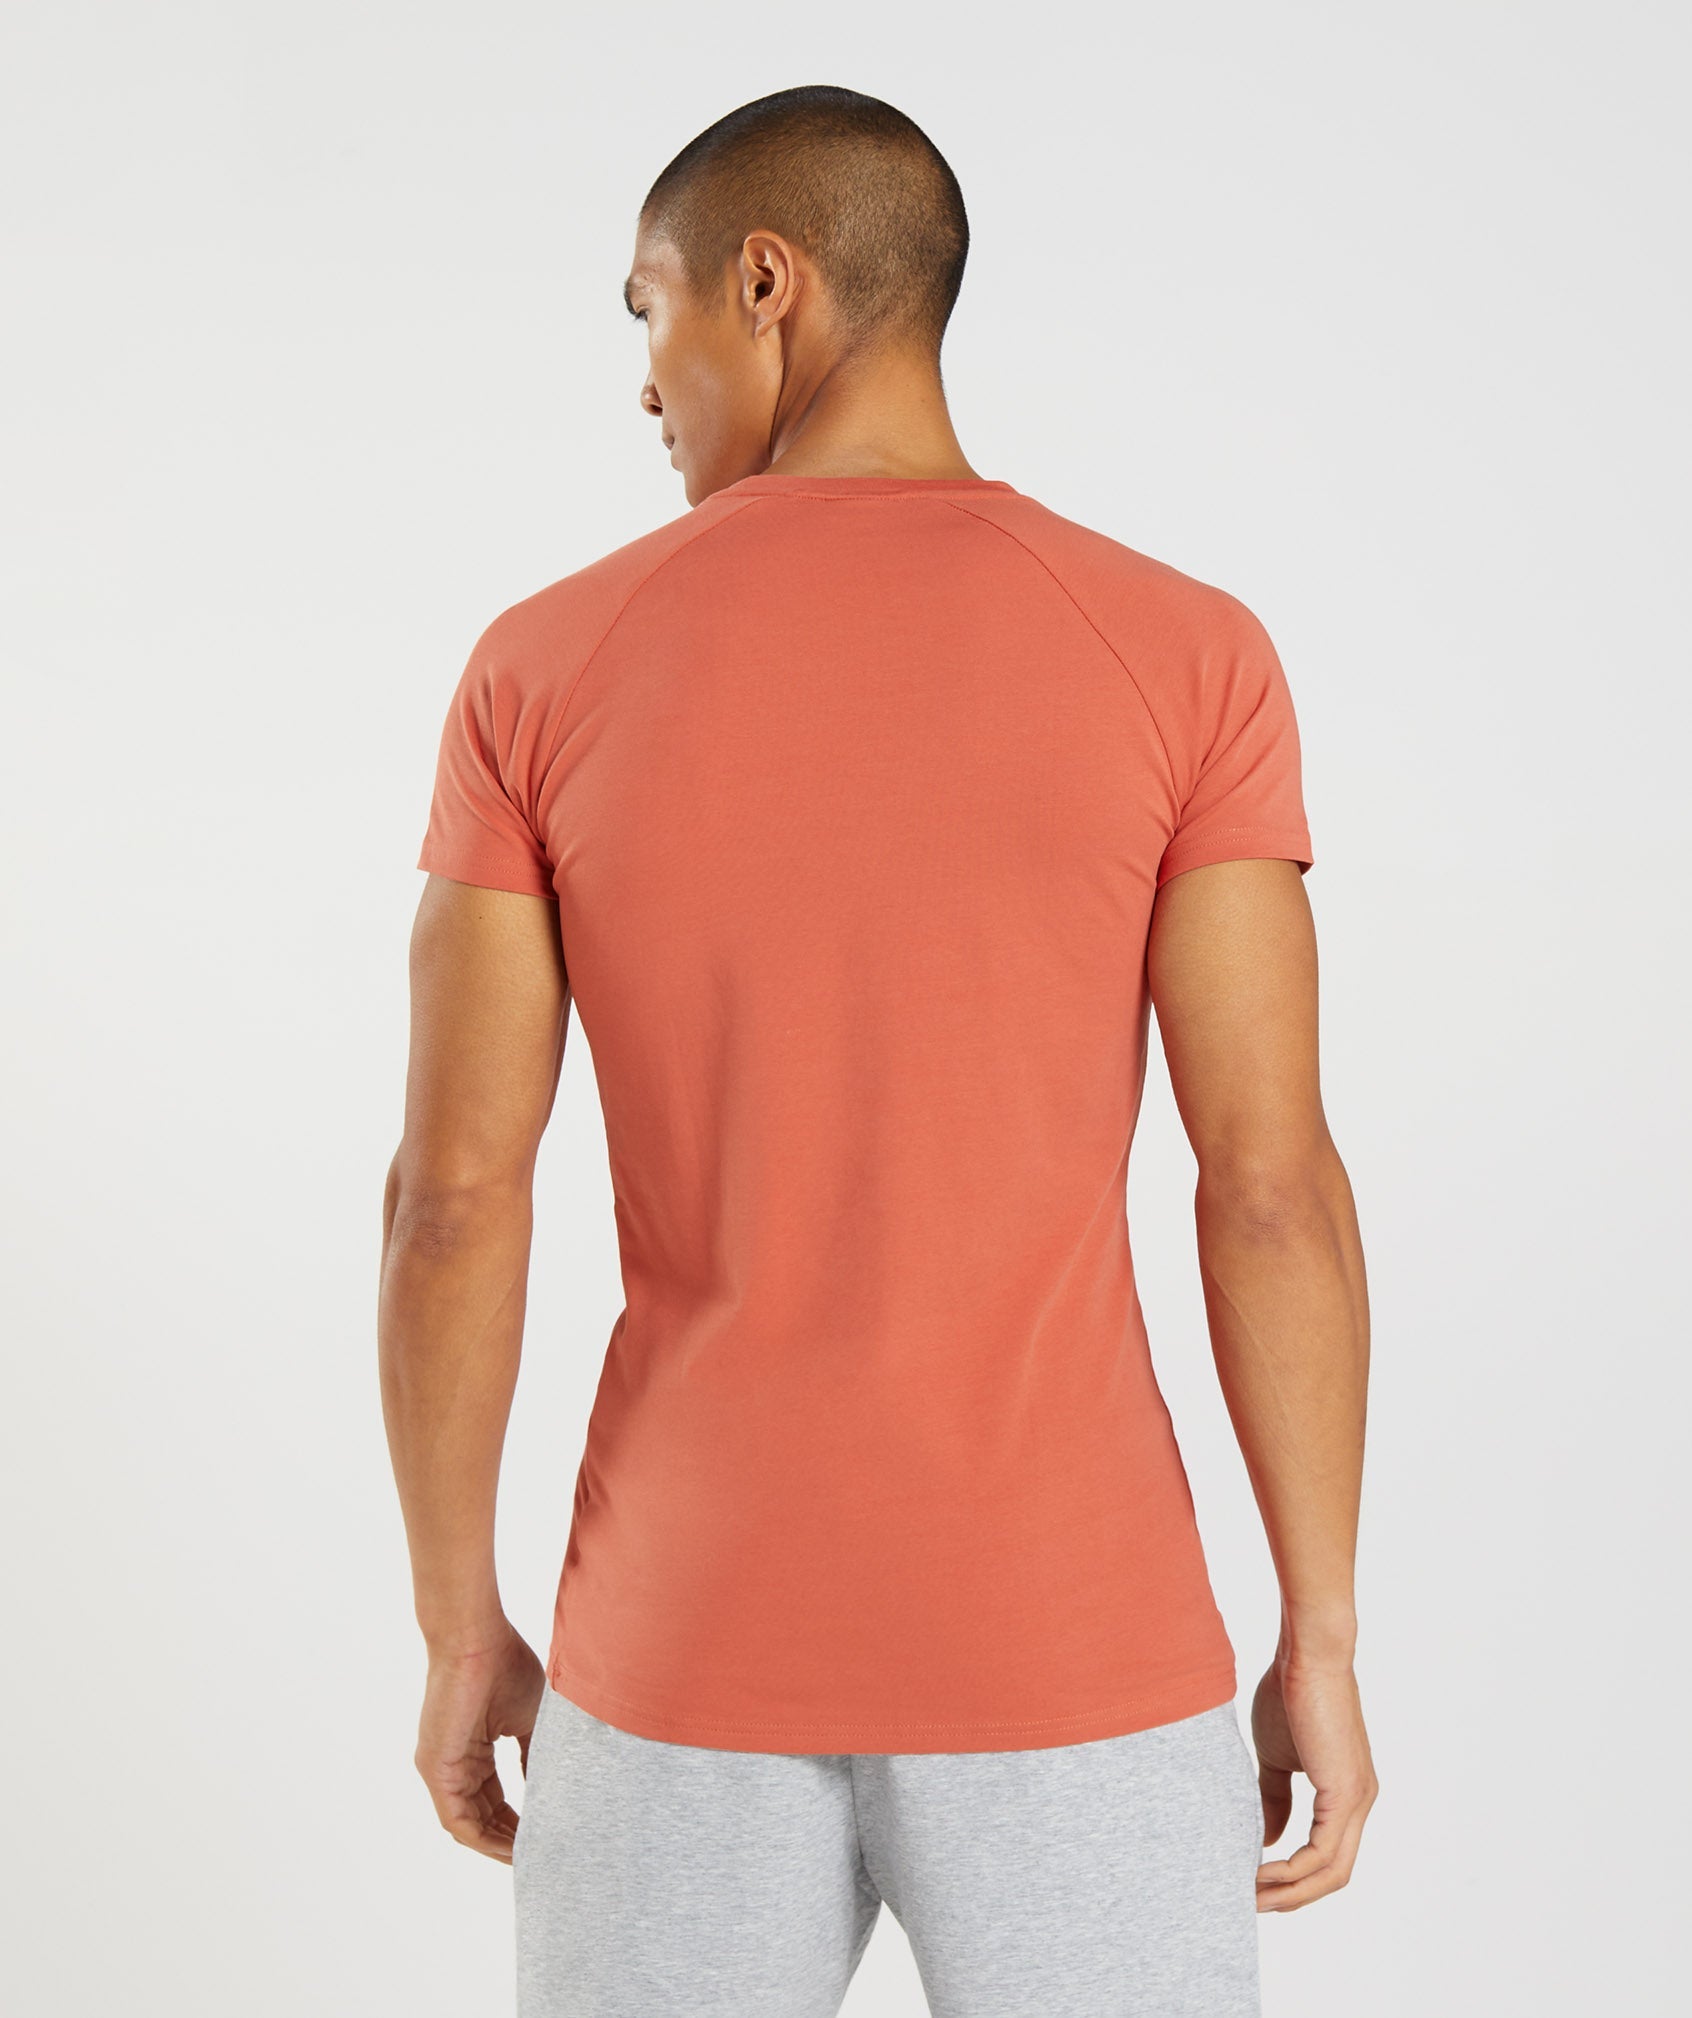 Apollo T-Shirt in Storm Red - view 2